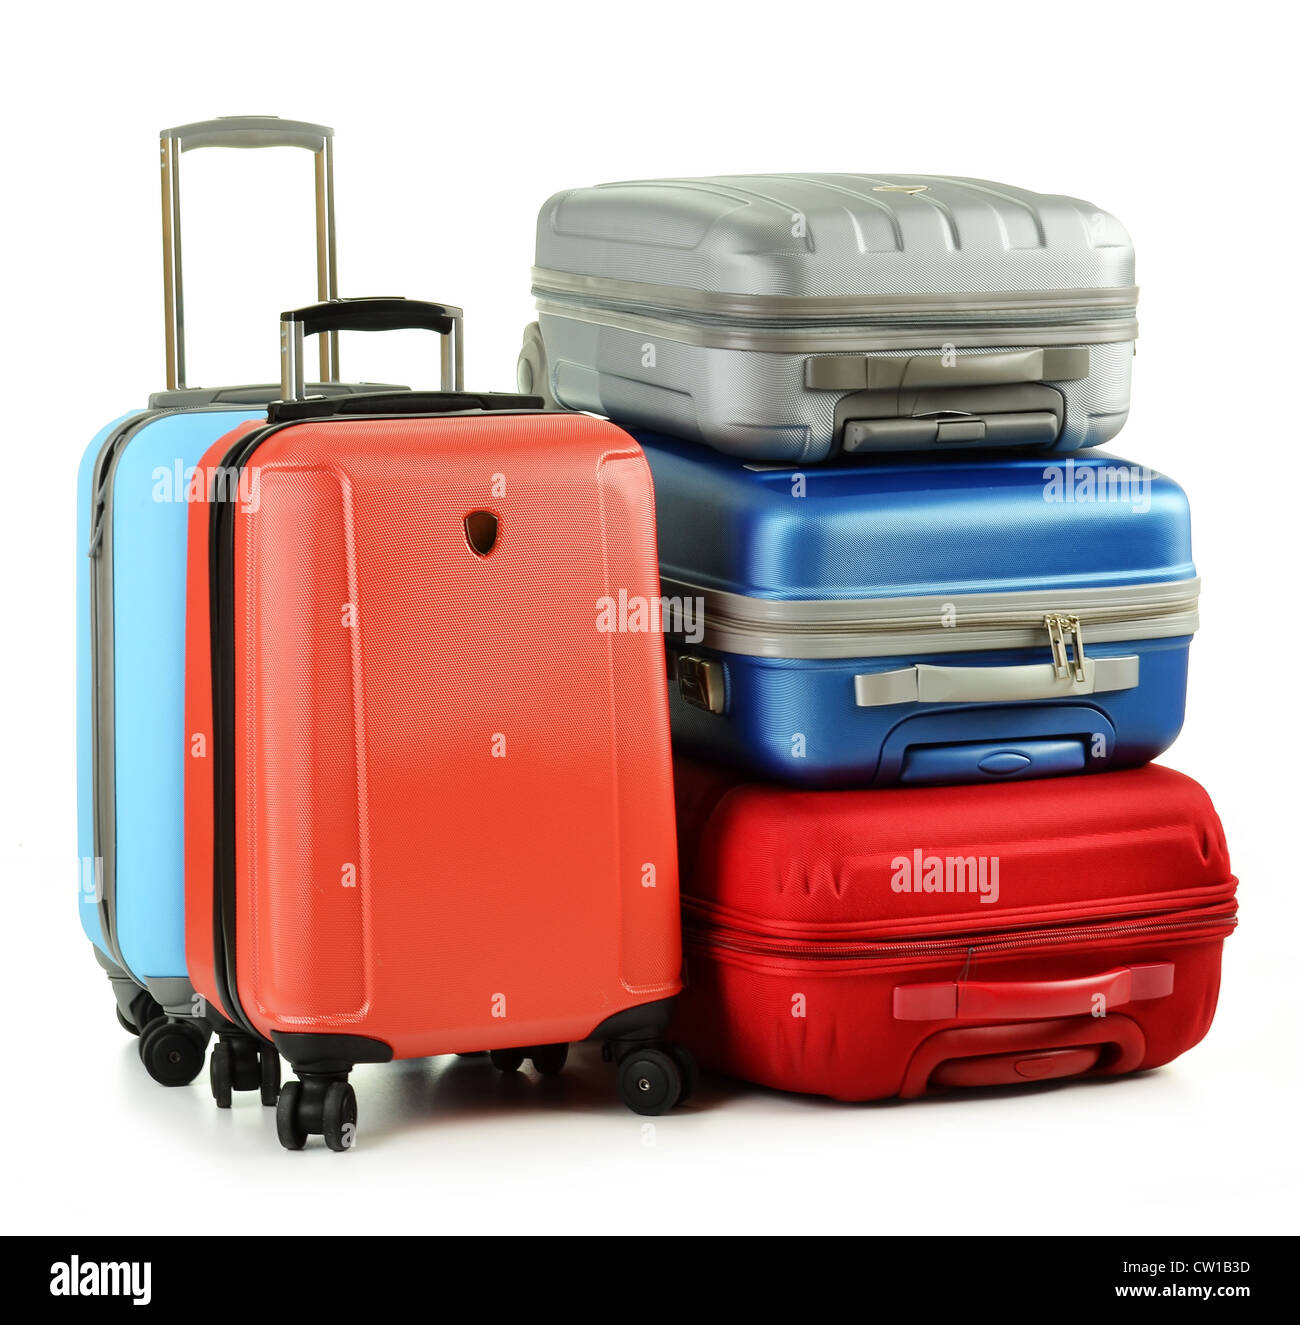 Luggage consisting of suitcases isolated on white Stock Photo